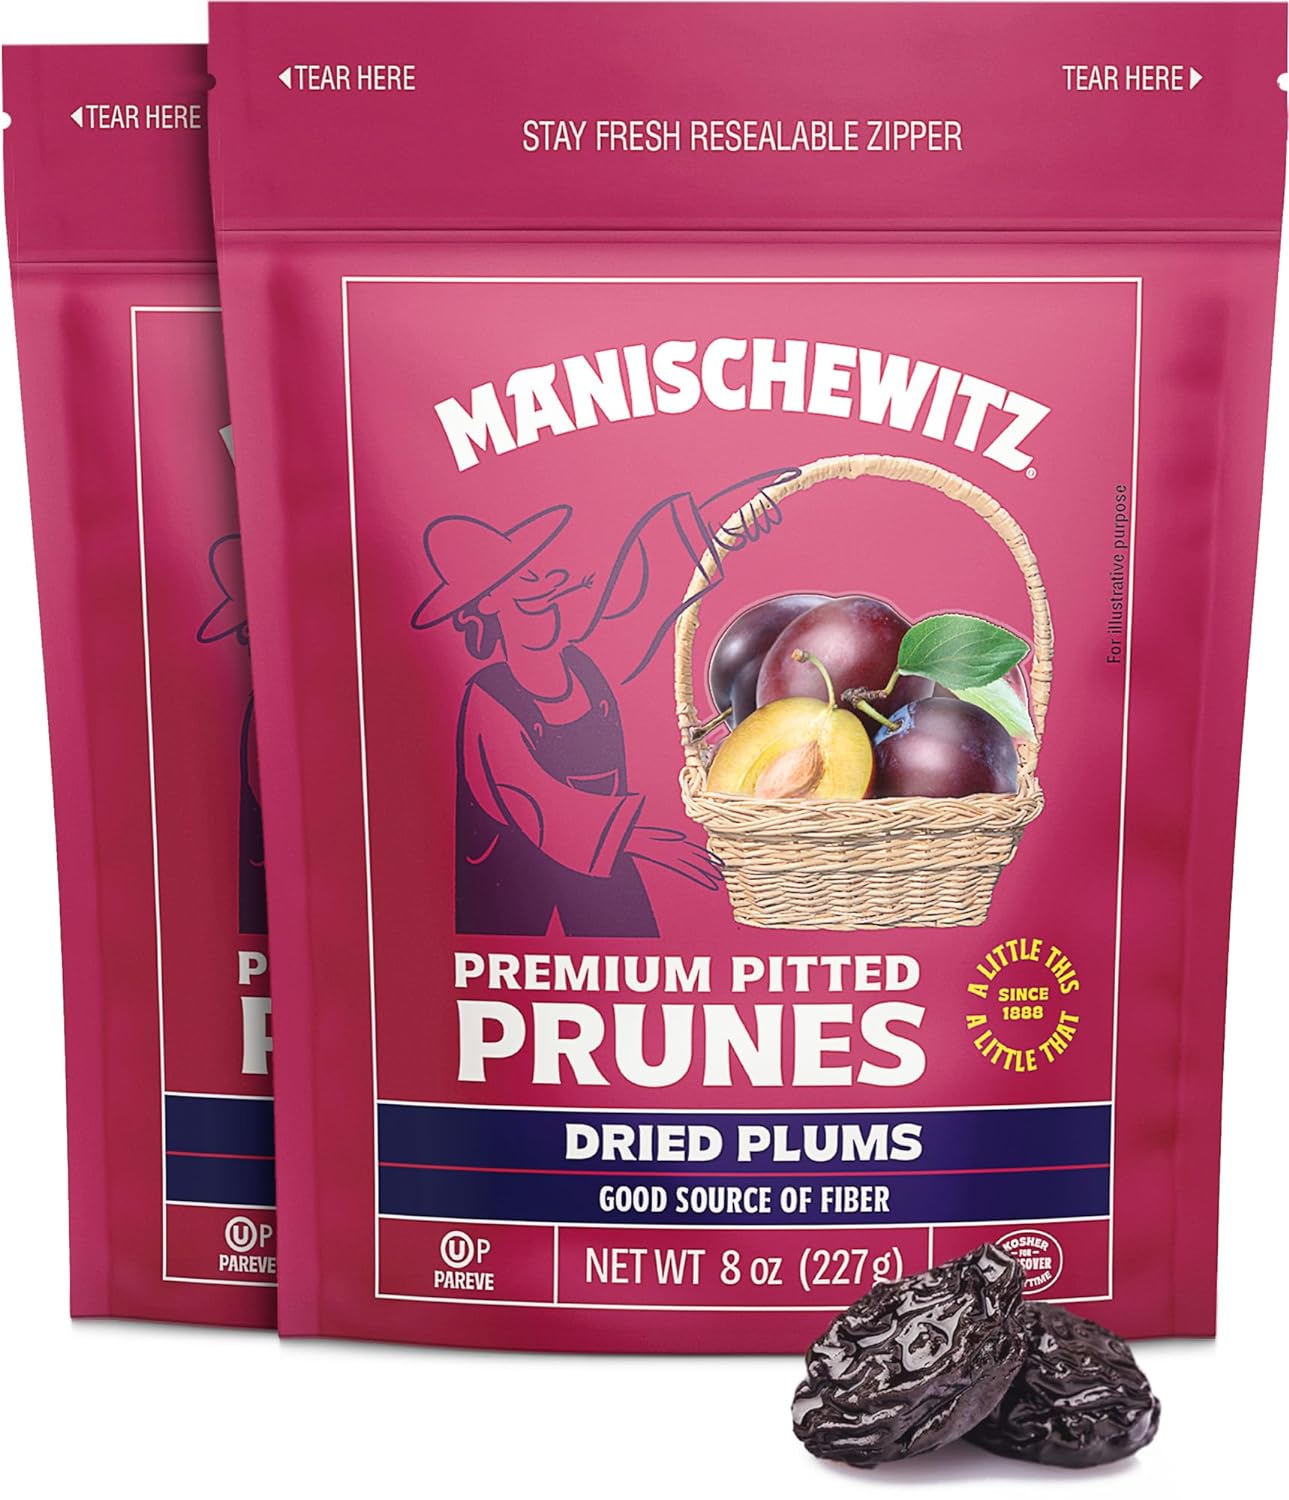 Manischewitz Premium Unsweetened California Pitted Prunes, 8oz (2 Pack = 1 Pound ) | Resealable Bags | Gluten Free | No Sugar Added | Good Source of Fiber | Product of the USA | Kosher | Made from Dried Plums